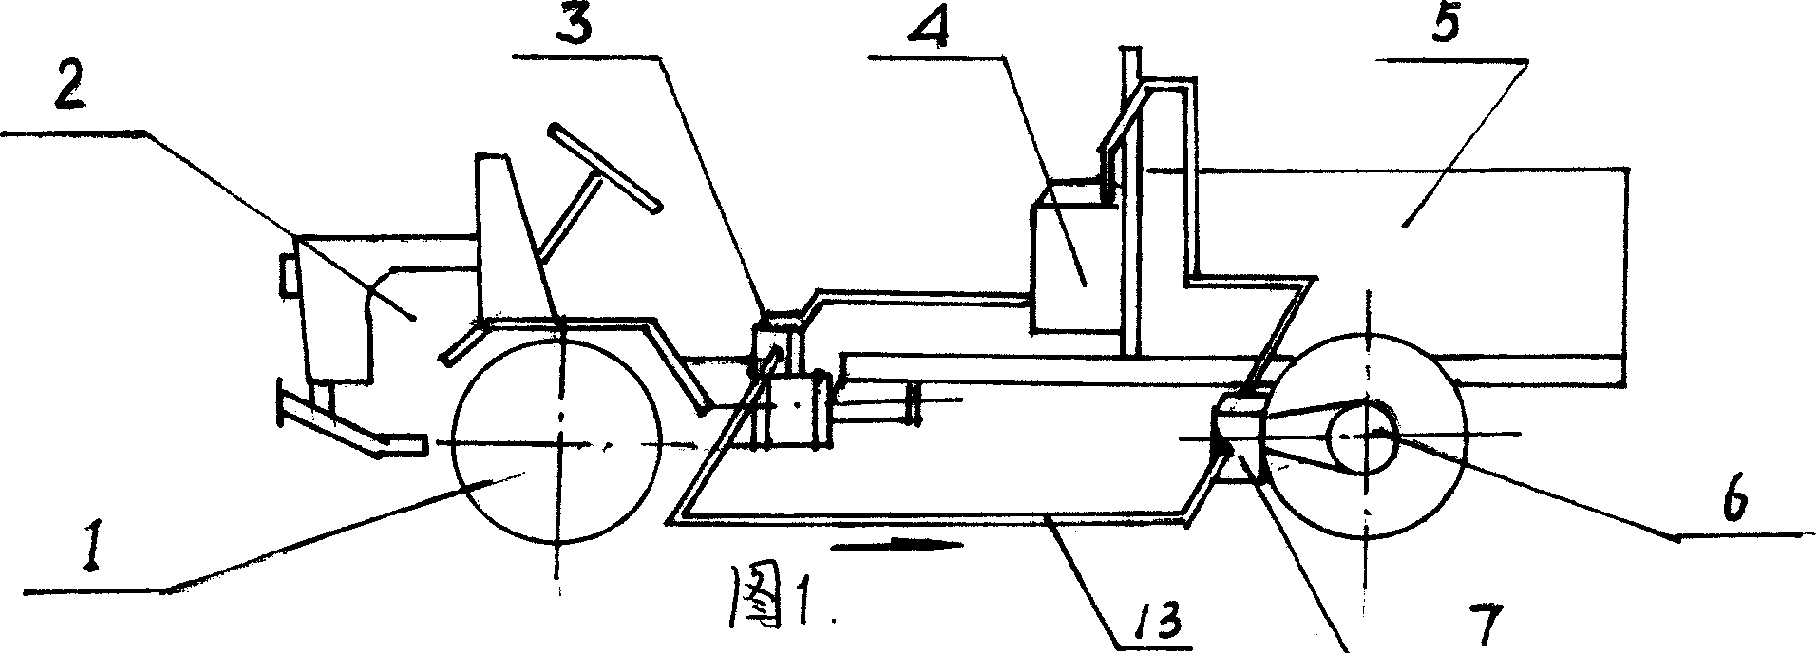 Hinged tractor with hydraulic driver on back wheel